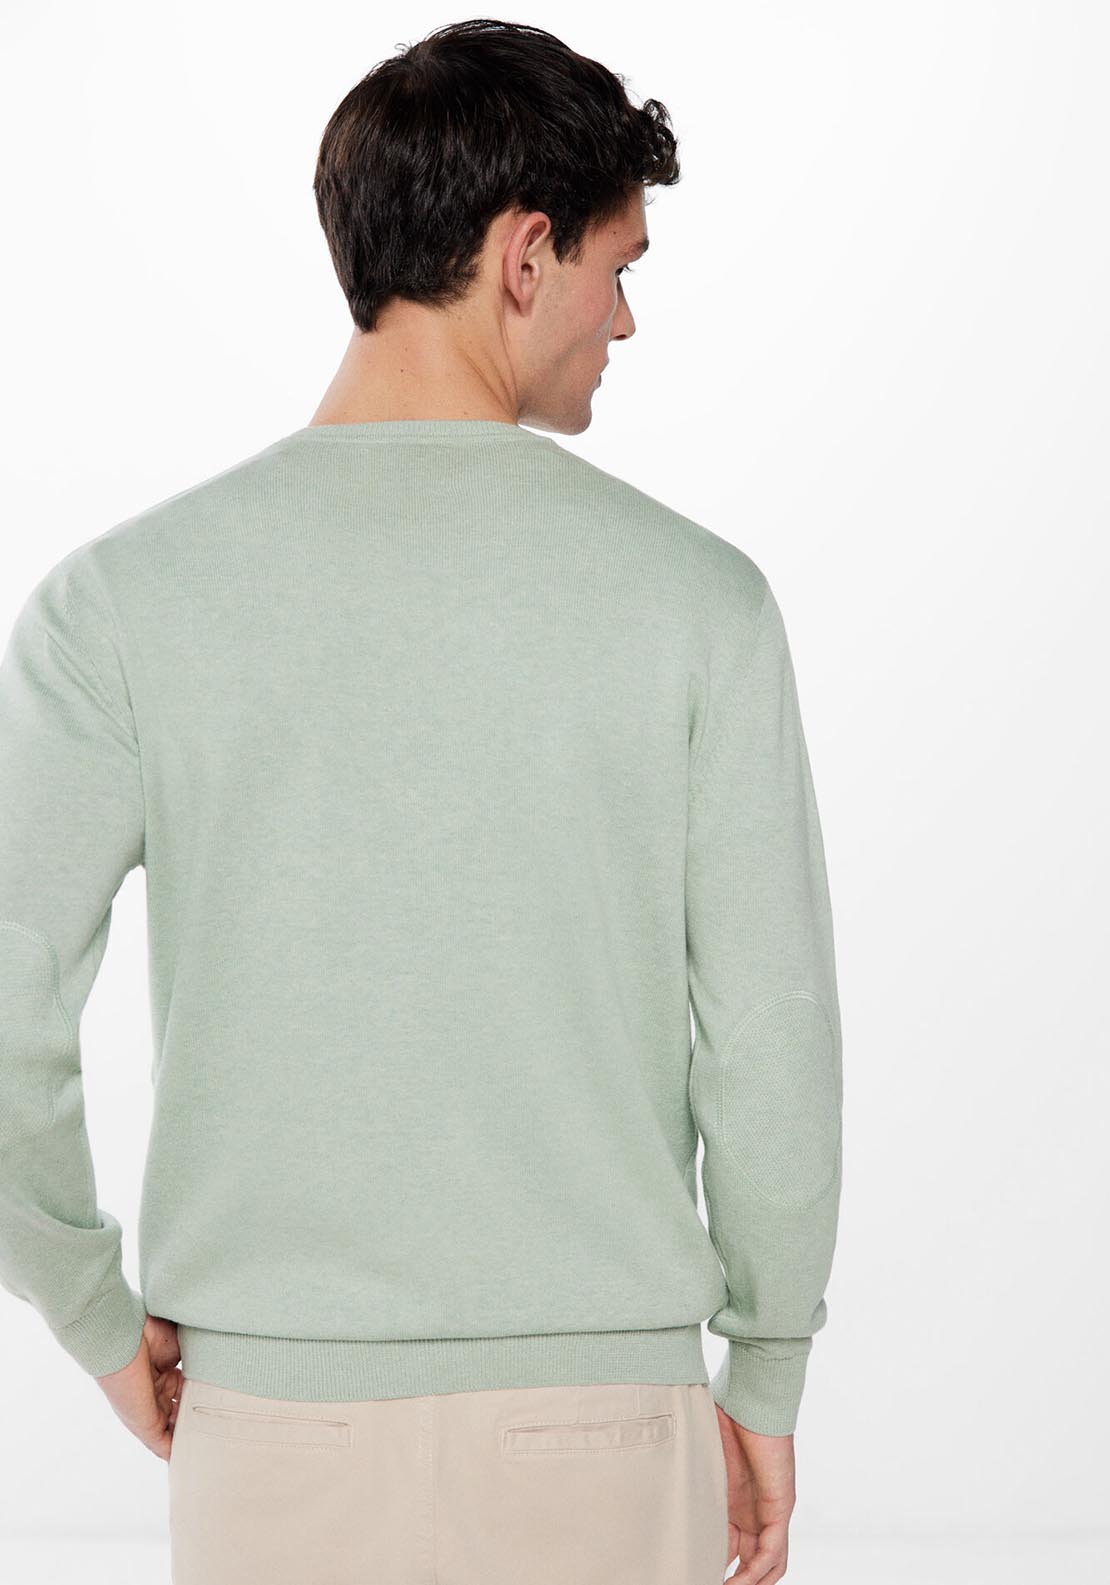 Springfield Essential jumper with elbow patches - Green 2 Shaws Department Stores